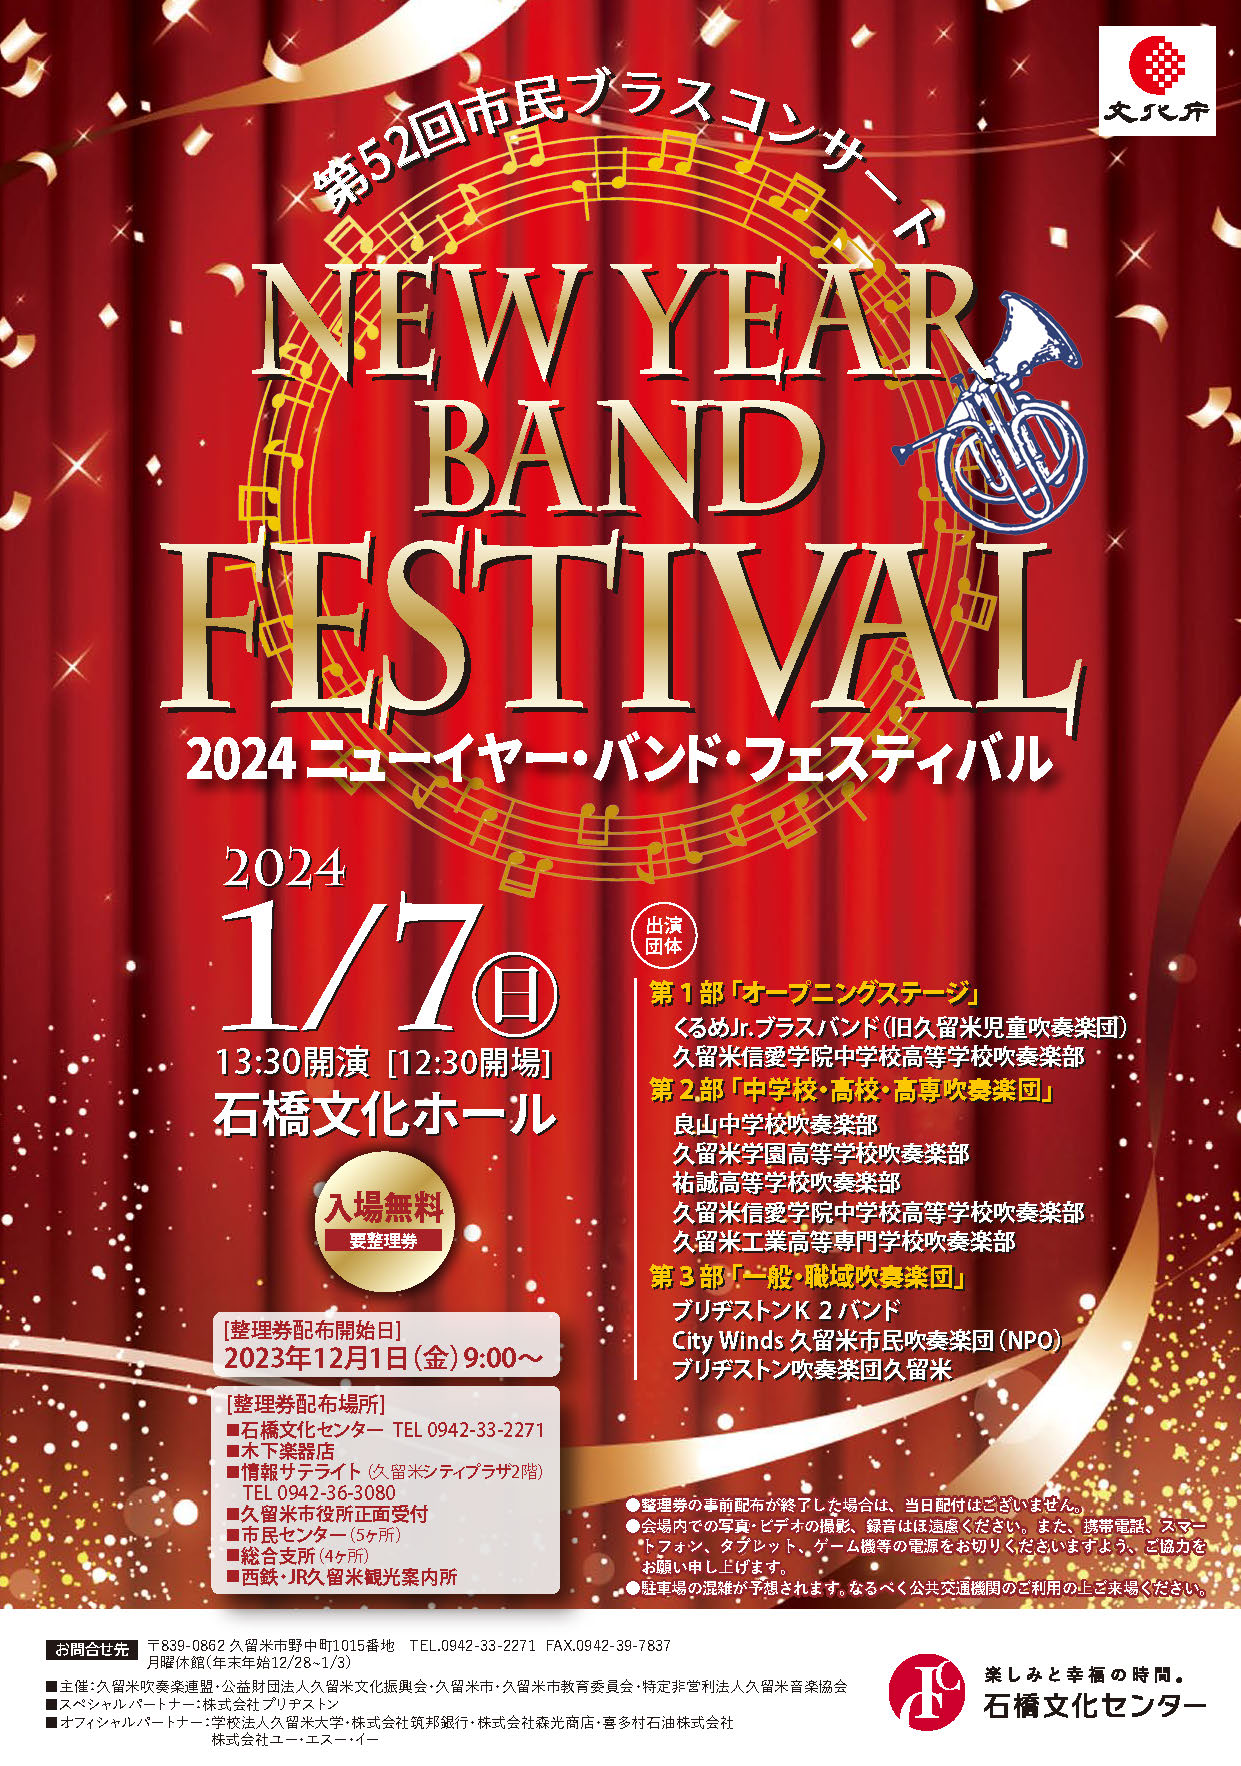 New Year Band Festival 2024